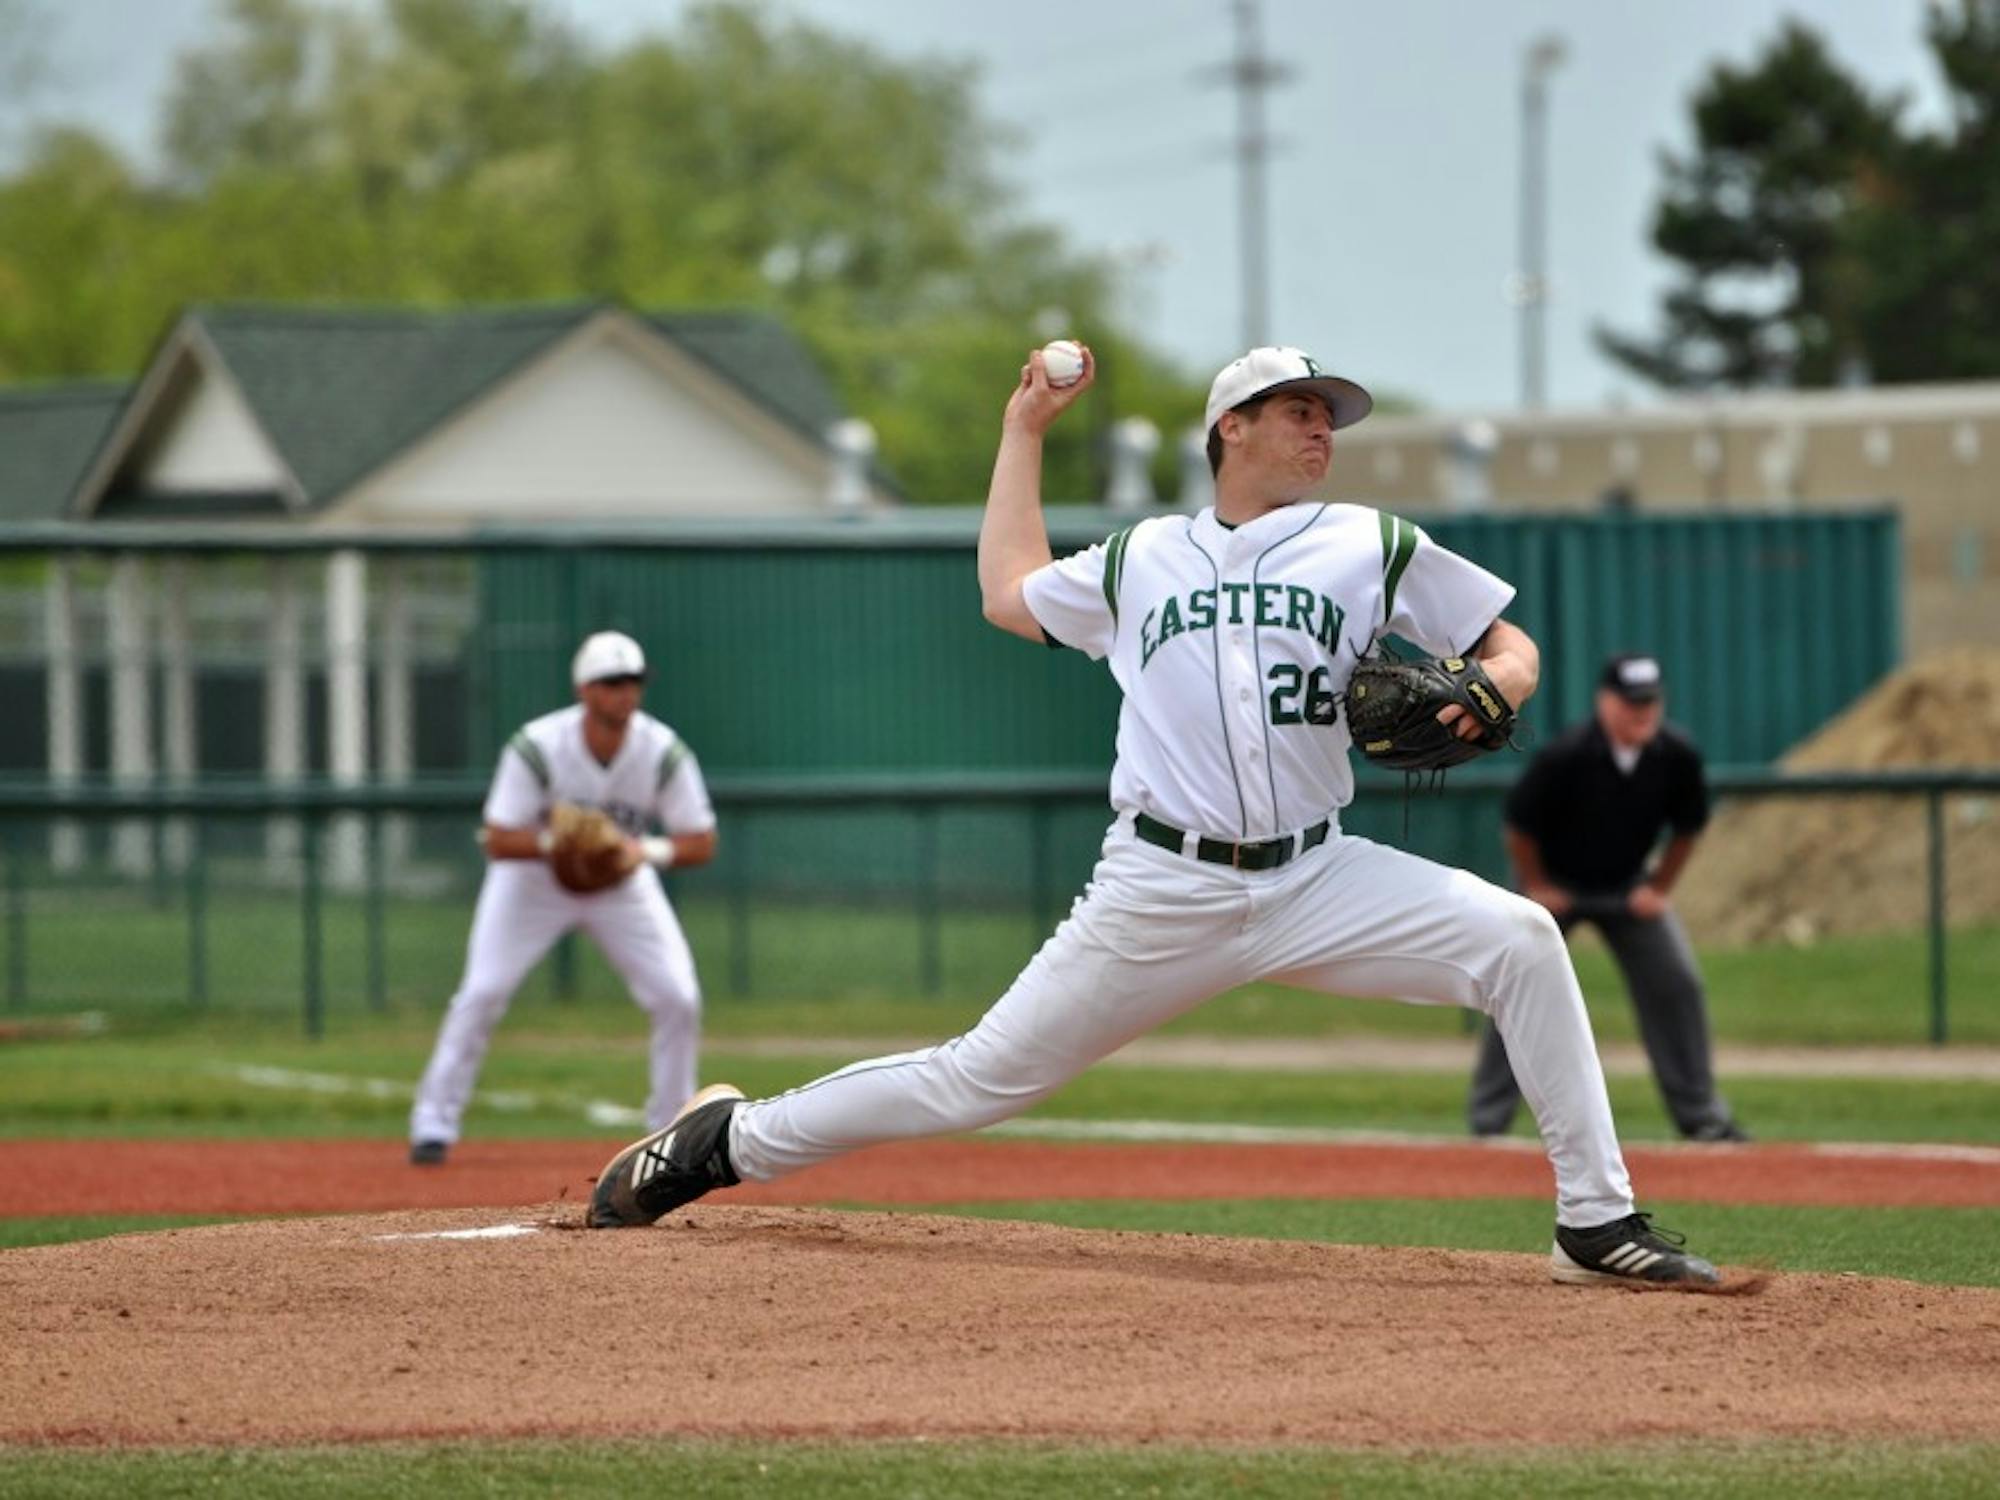 Eastern Michigan freshman starting pitcher Ryan Lavoie (3-3) picked up the loss, allowing four runs in the first inning. Redshirt senior Bo Kinder went 1-for-4 on the day and had one RBI.